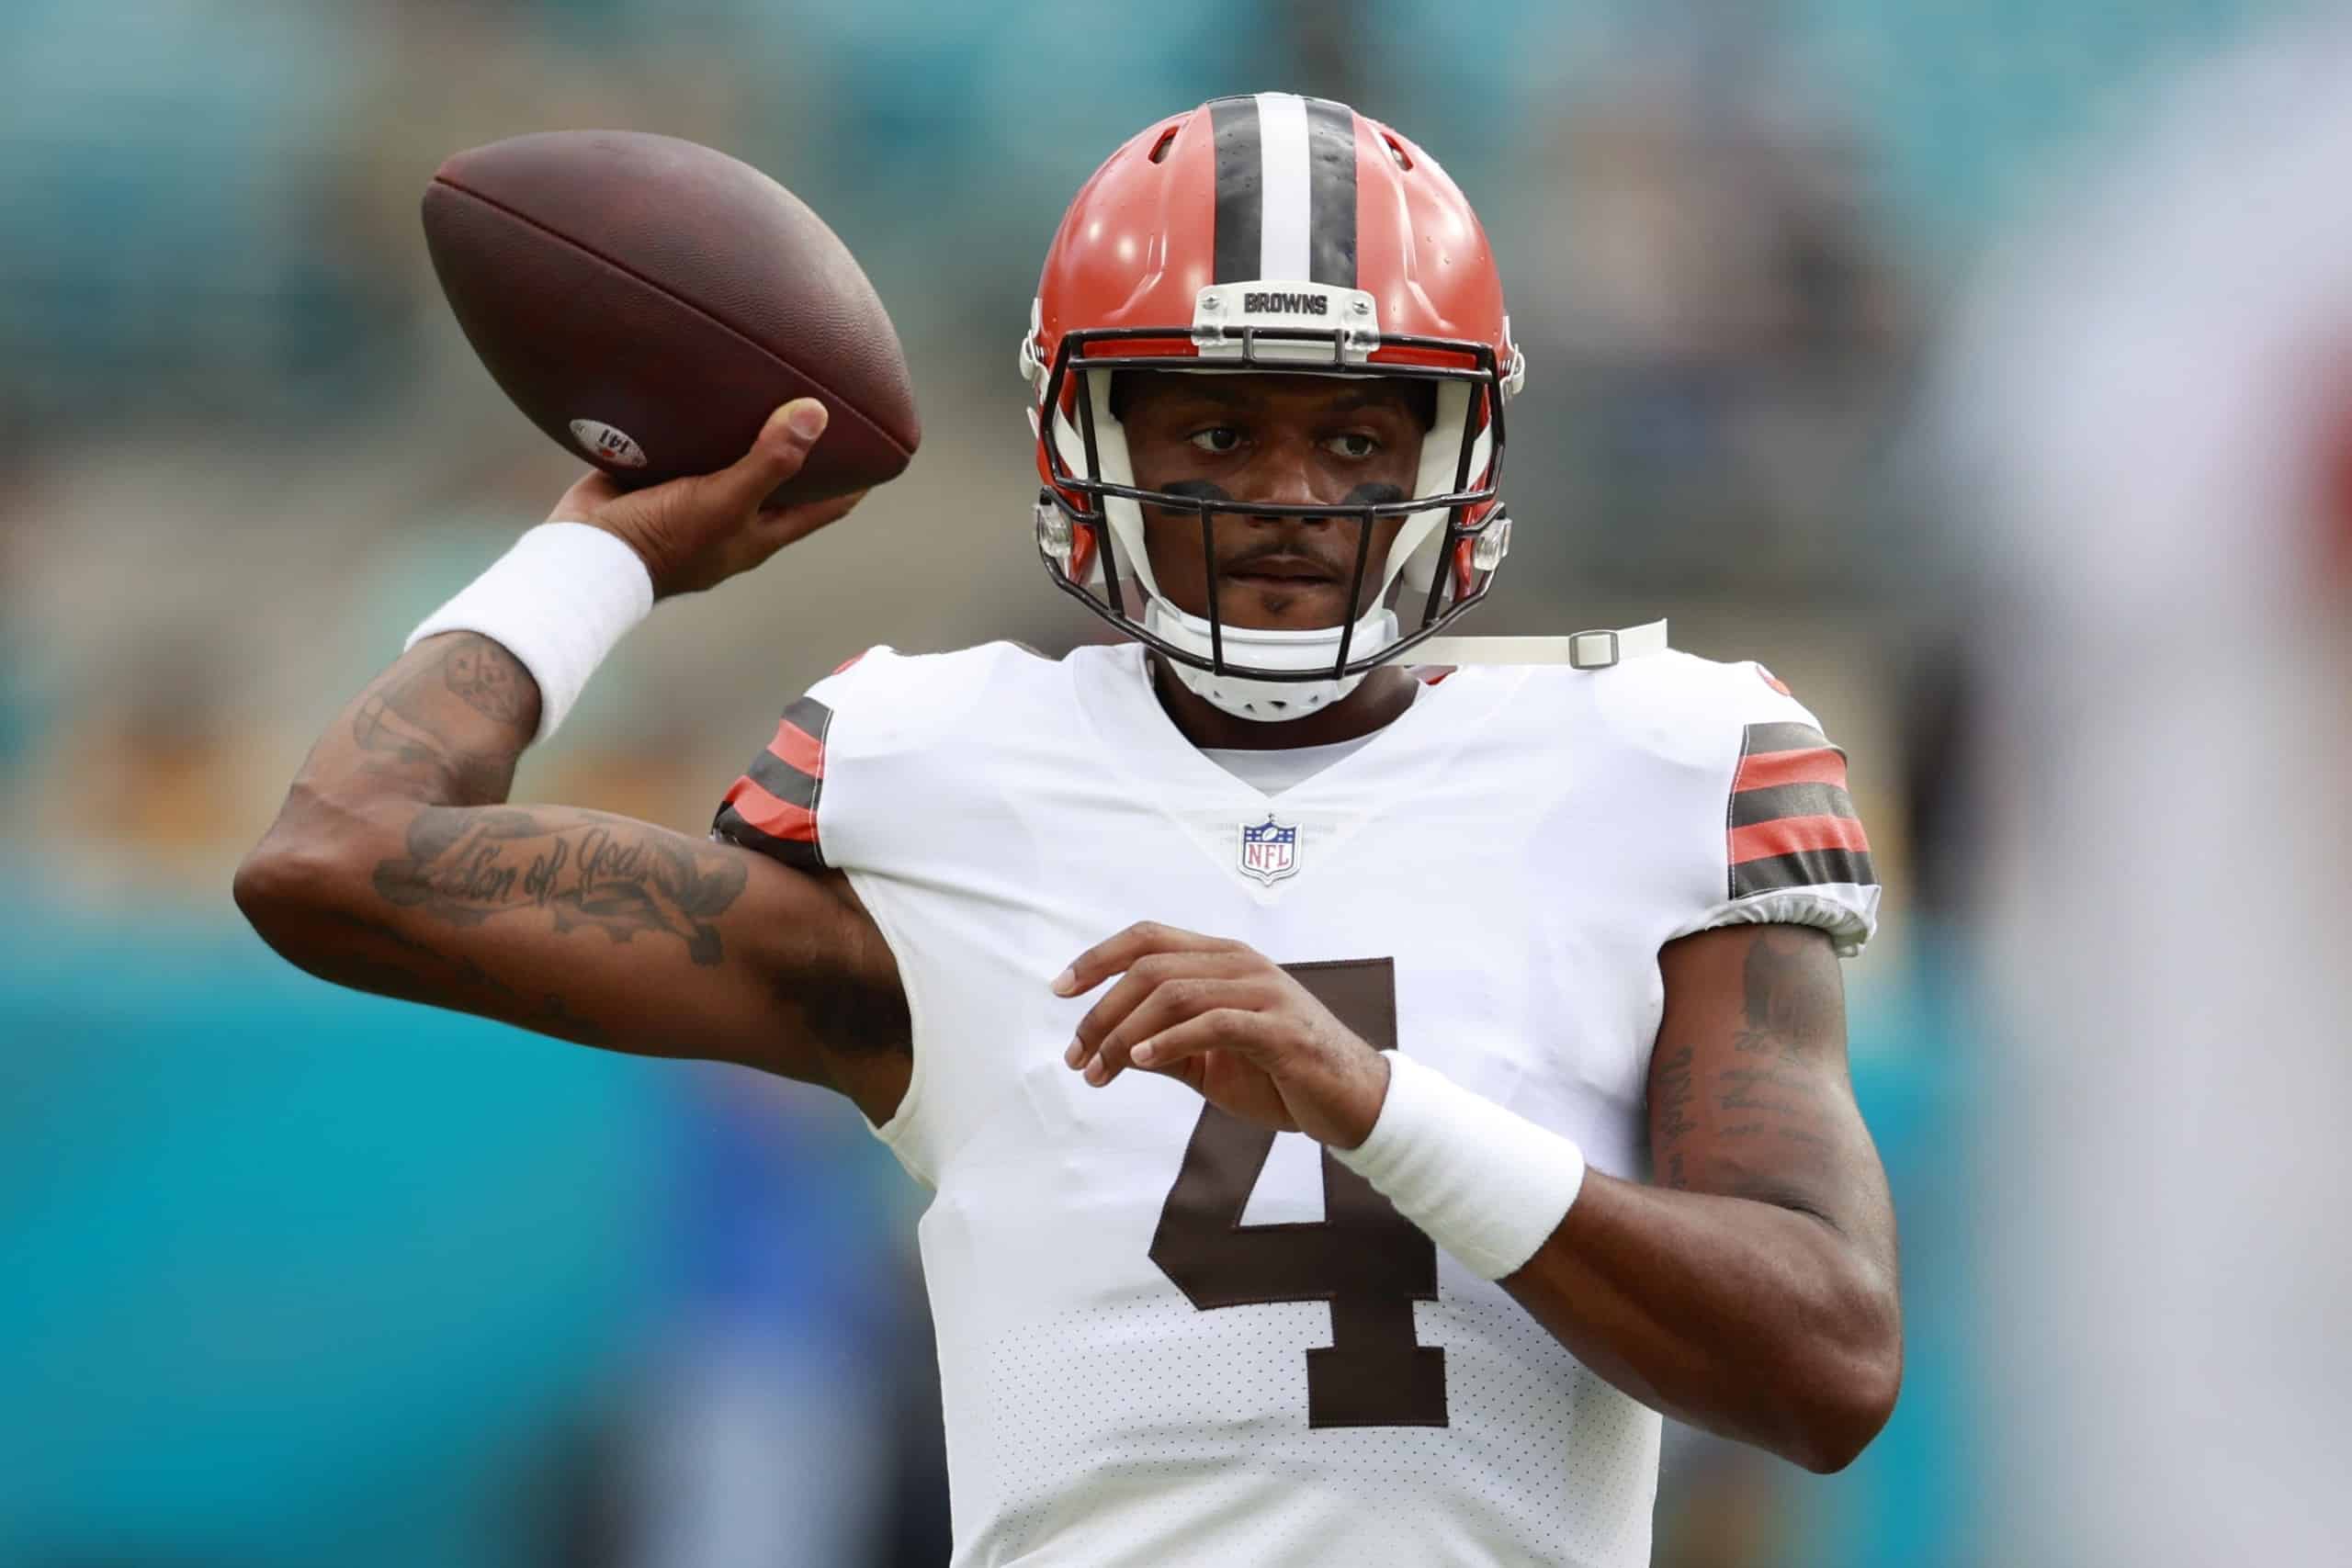 Deshaun Watson throws pass prior to game with the Cleveland Browns